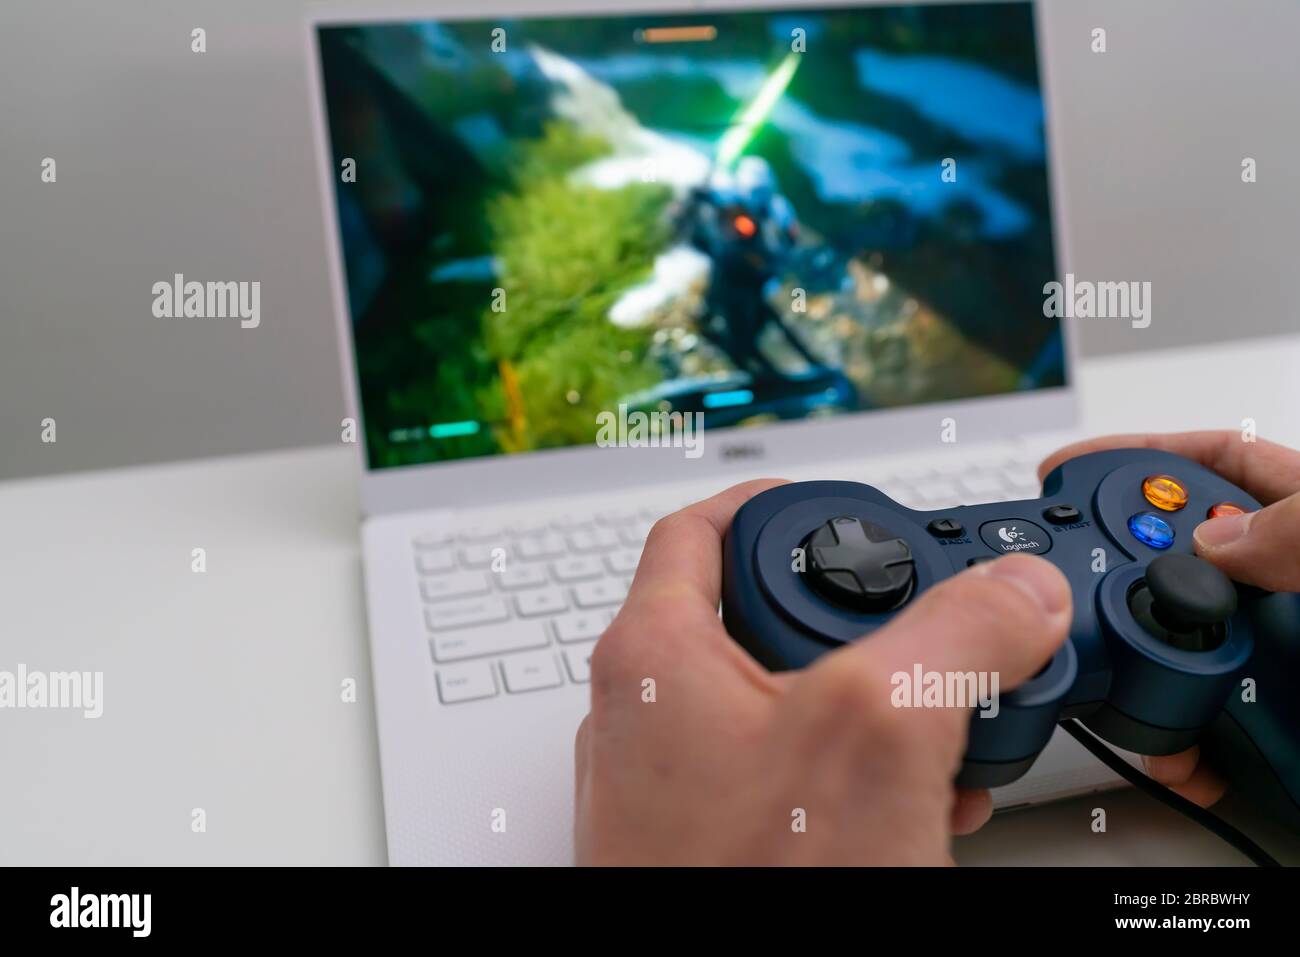 Playing game on laptop computer with joypad Stock Photo